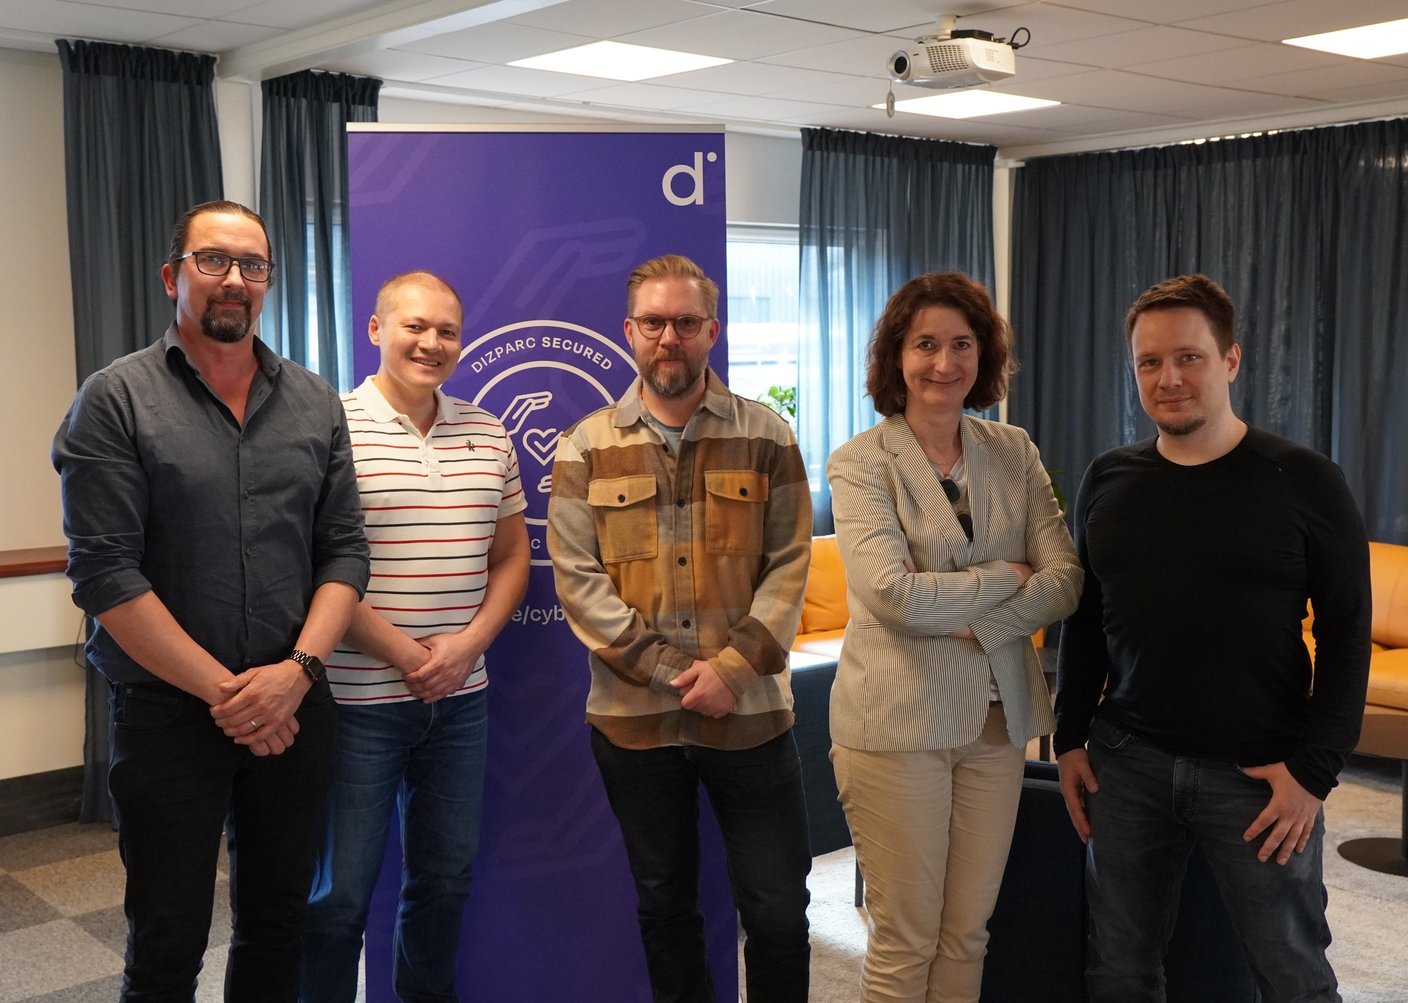 Representatives from Dizparc Secured and Karlstad University